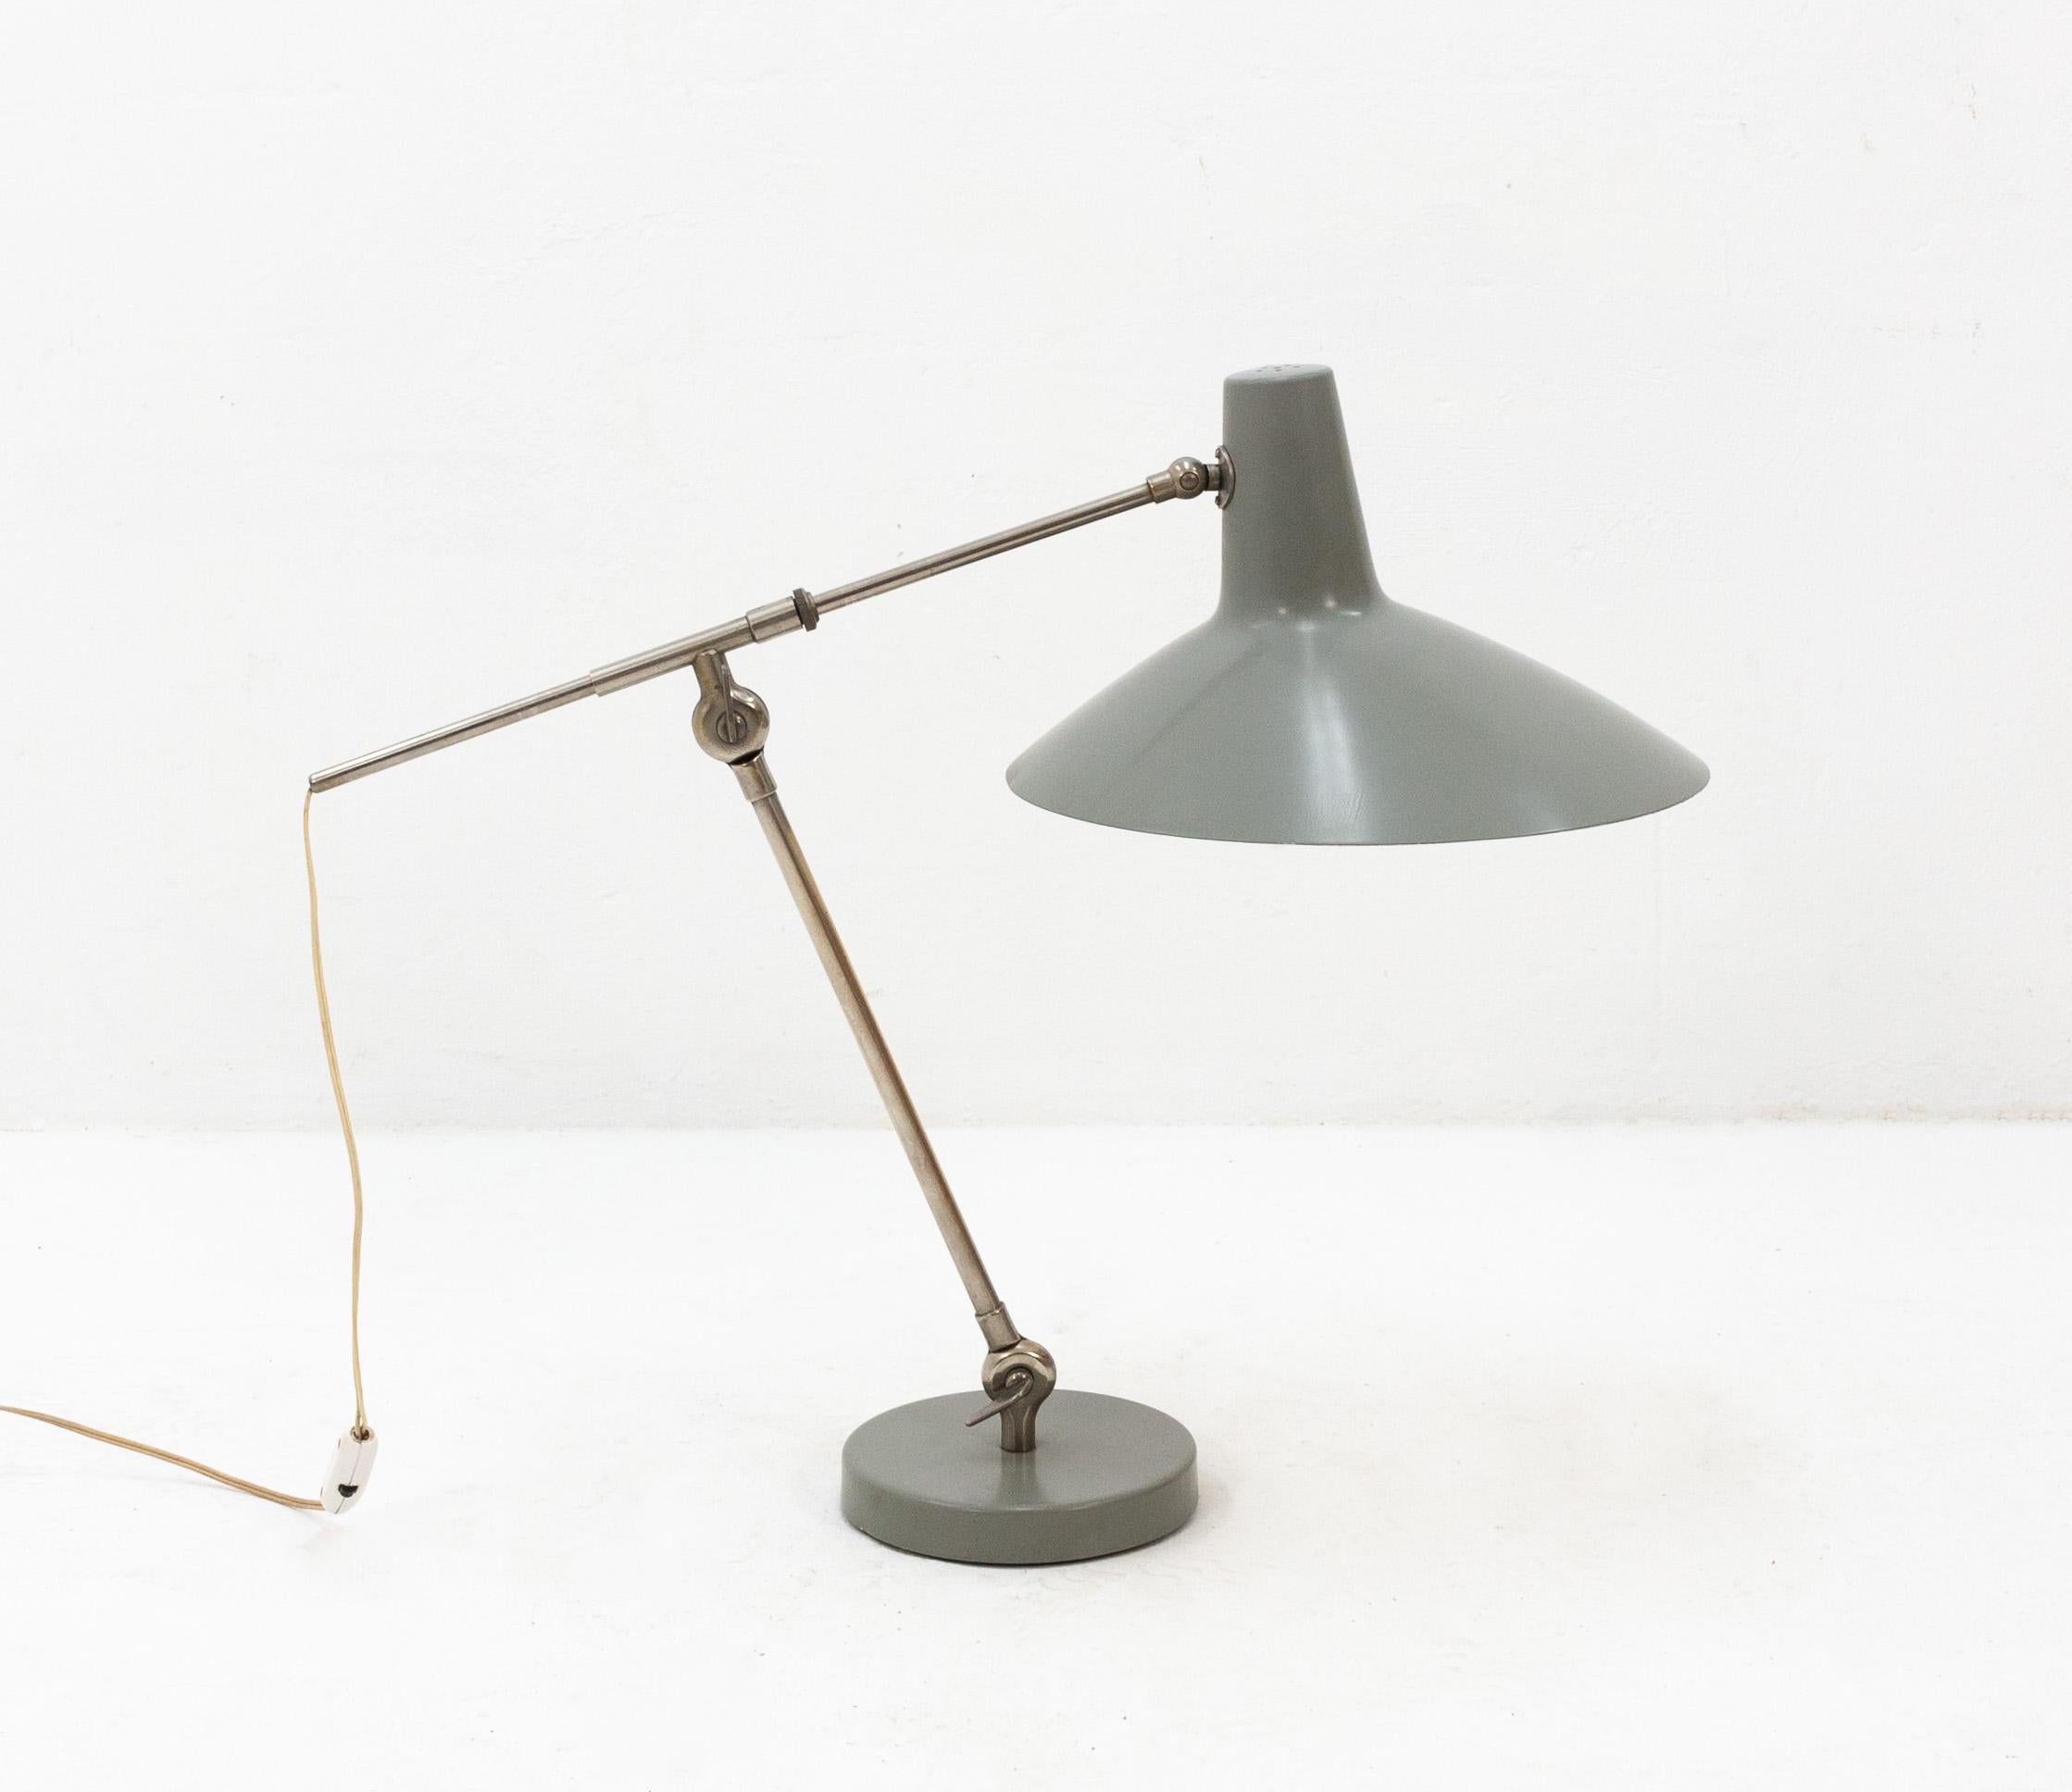 Very well designed desk lamp. Design by Floris Fideldij for Artimeta Soest Holland 1960s  featuring a nickel-plated telescoping arm on two joints and its original industrial gray paint.  Very rare lamp in good condition.
  